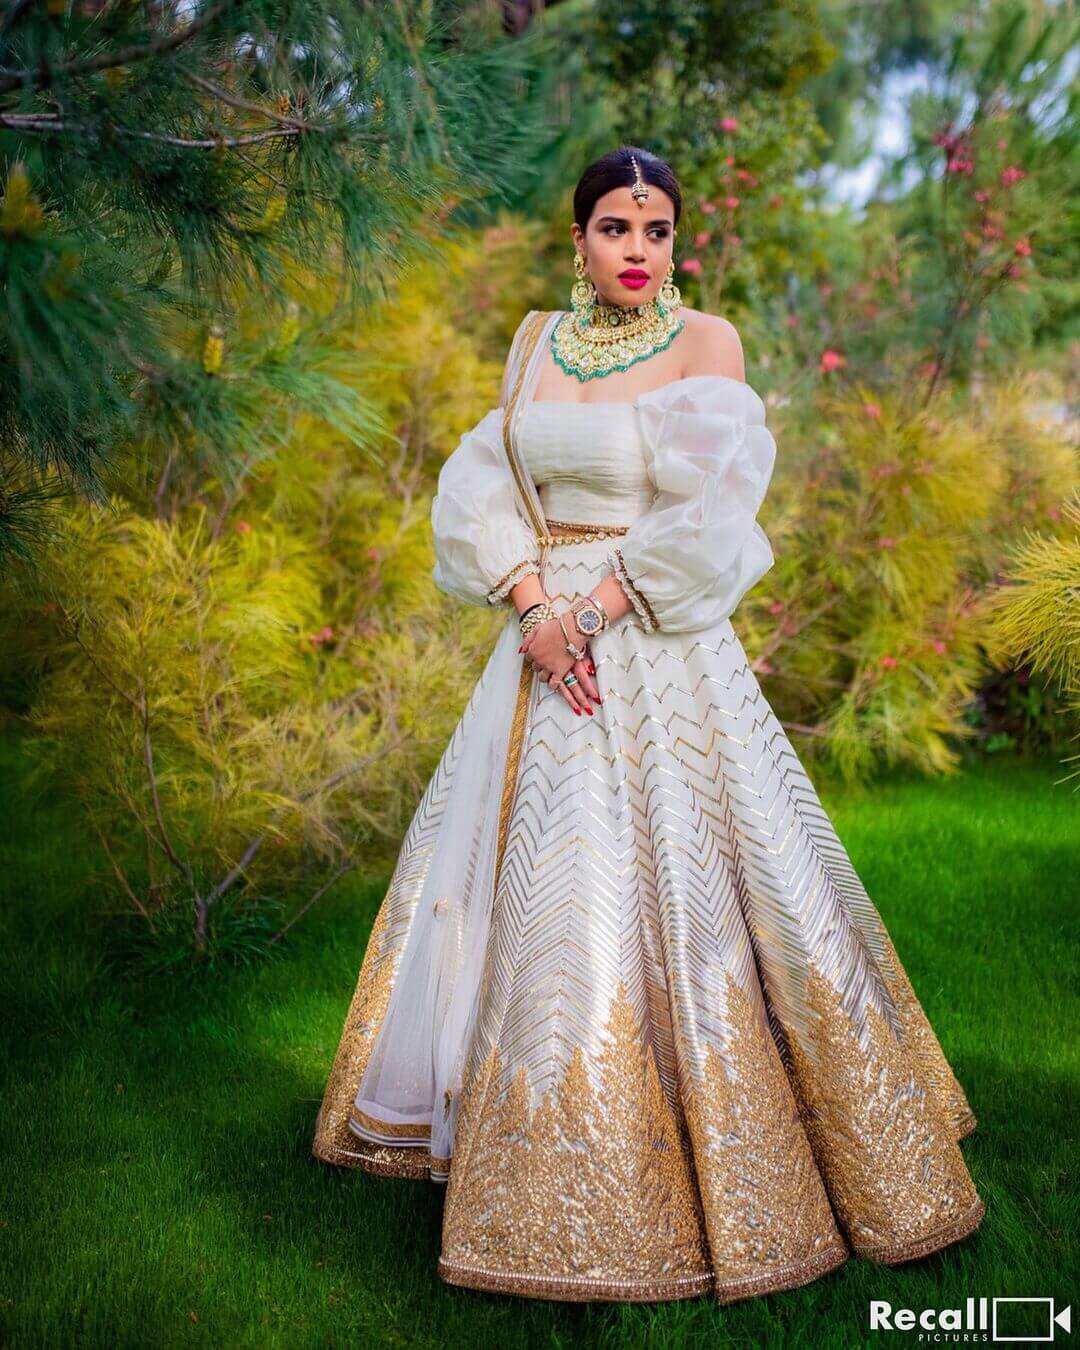 All Sorts Of Royalty Added To This Lehenga!